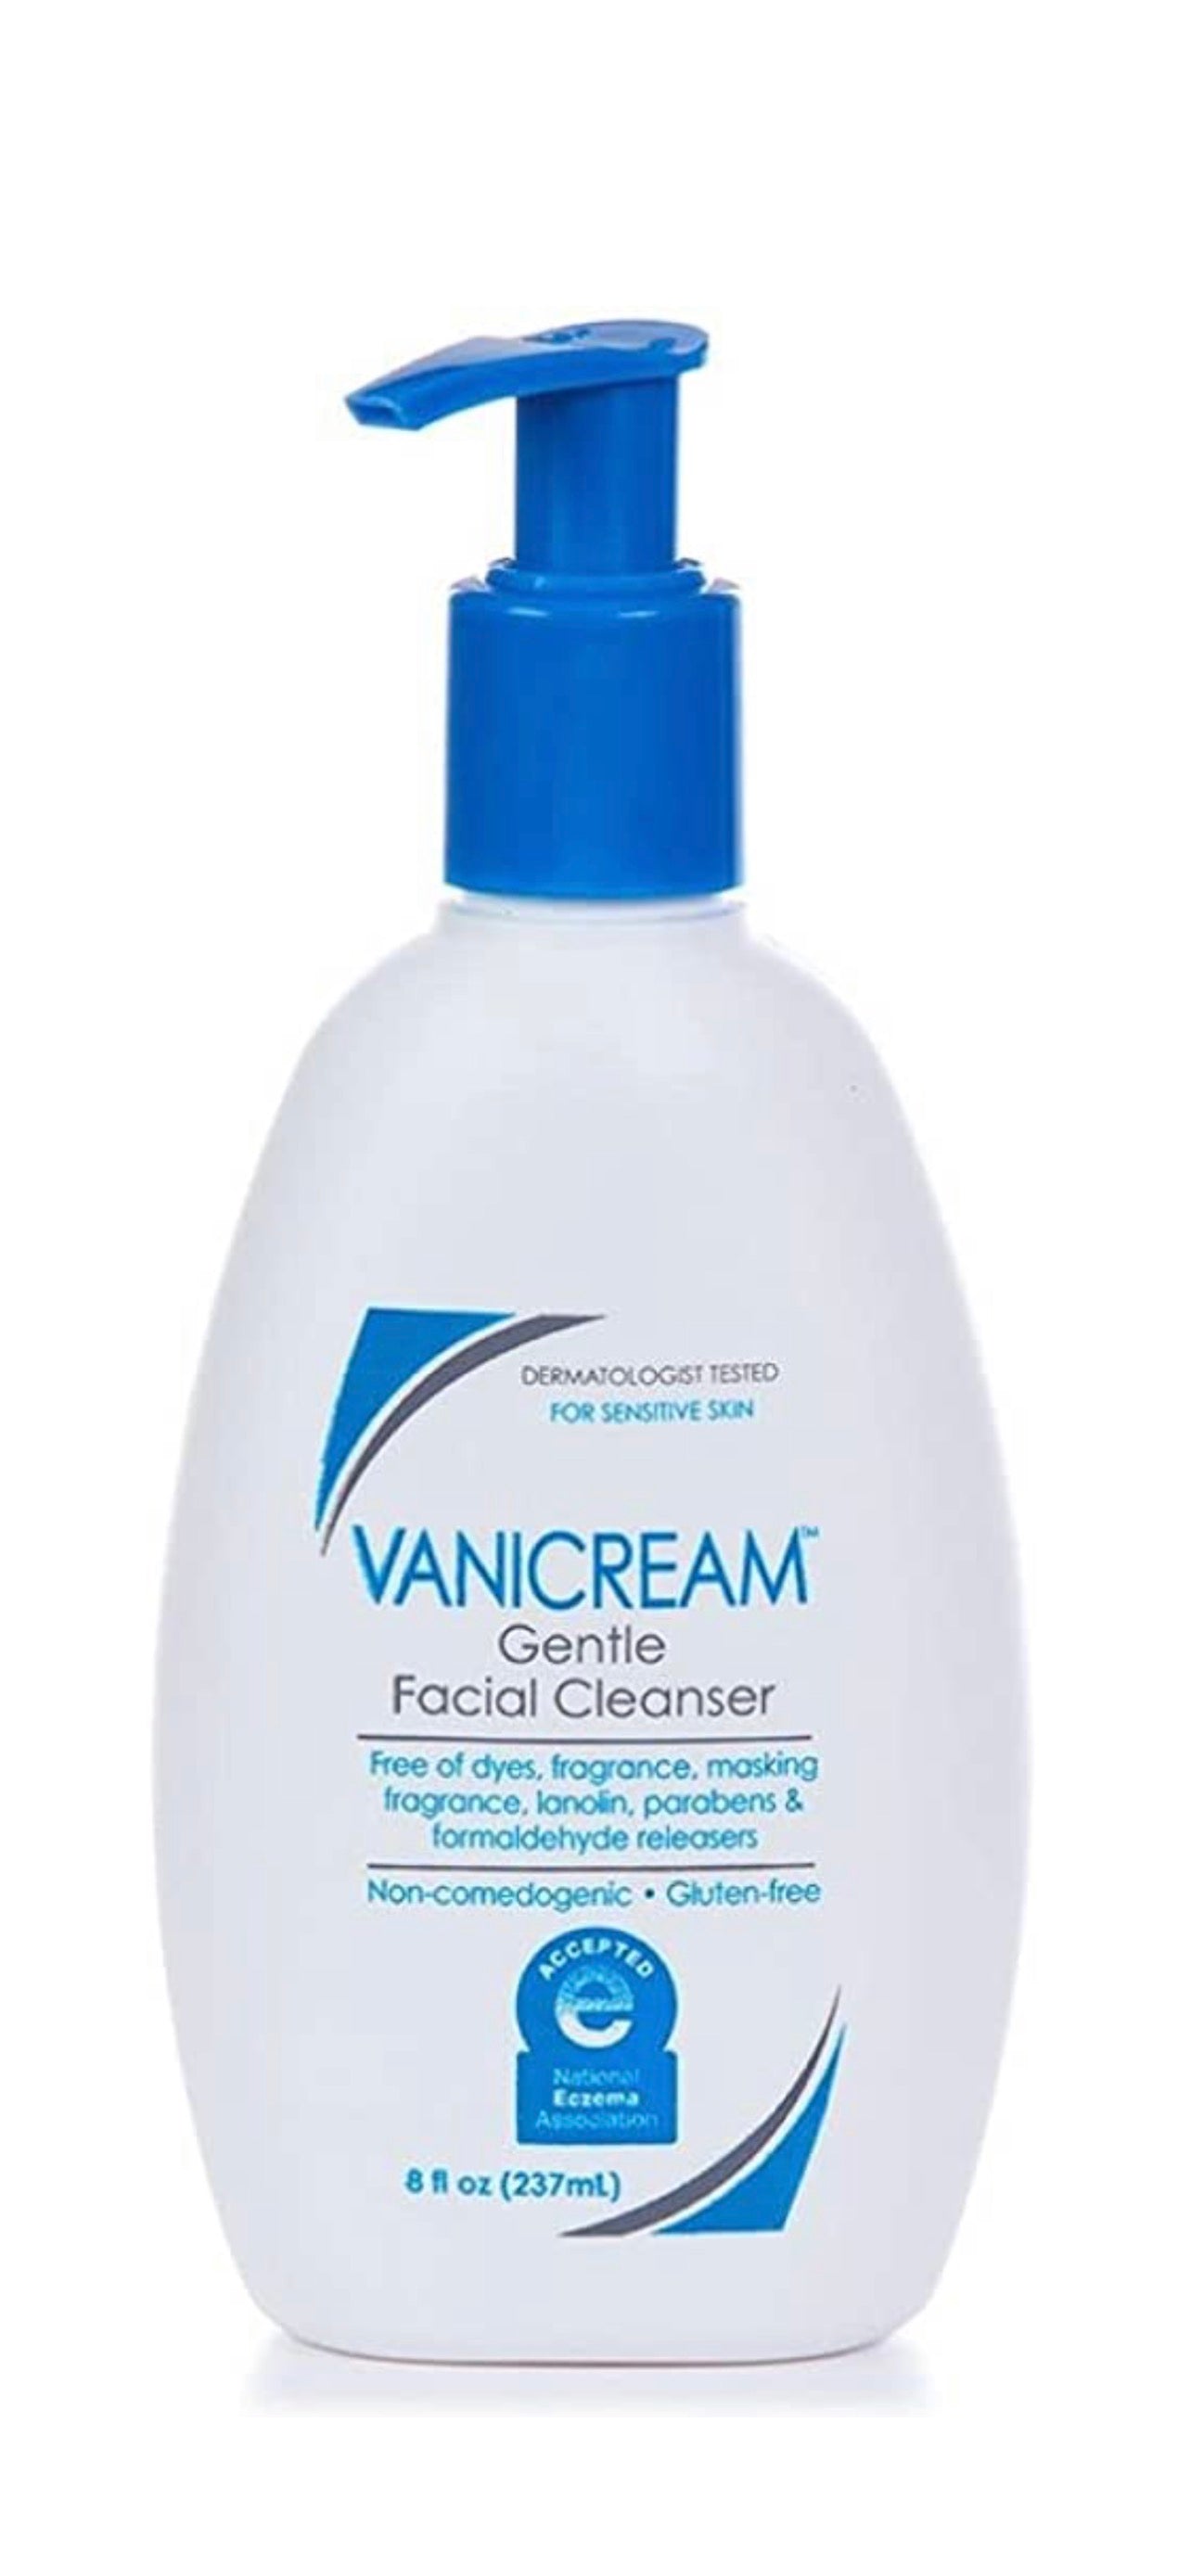 Vanicream GENTLE FACIAL CLEANSER with PUMP DISPENSER for SENSITIVE SKIN 8 fl oz Formulated Without Common Irritants for Those with Sensitive Skin - Supporting ORCRF.org